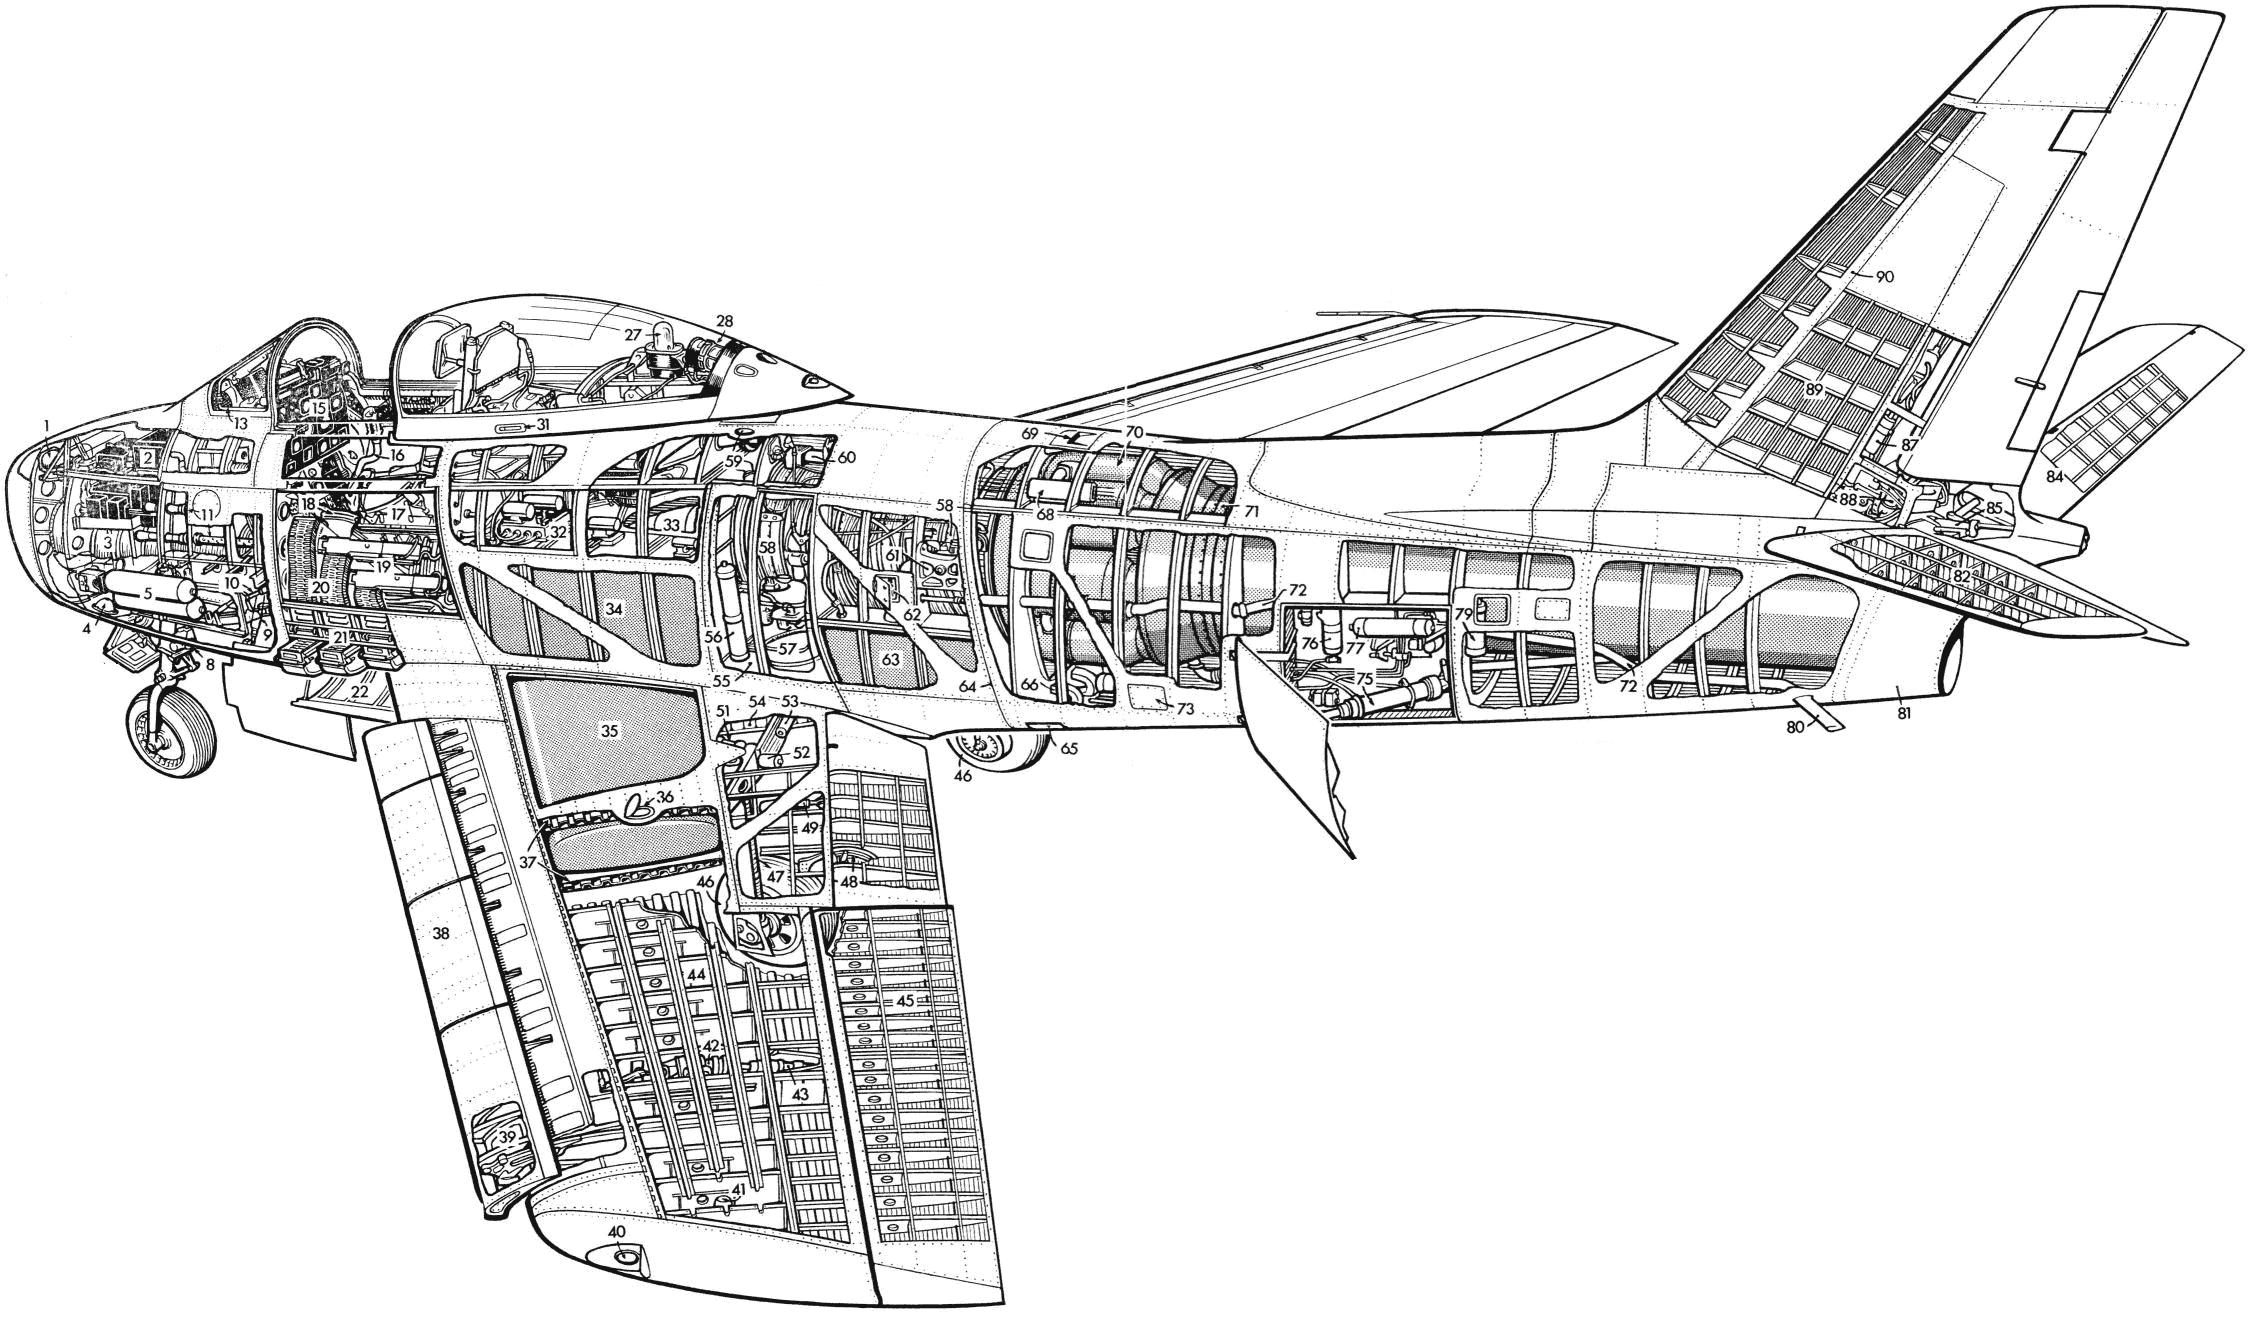 North American F-86 Sabre Cutaway Drawing in High quality.